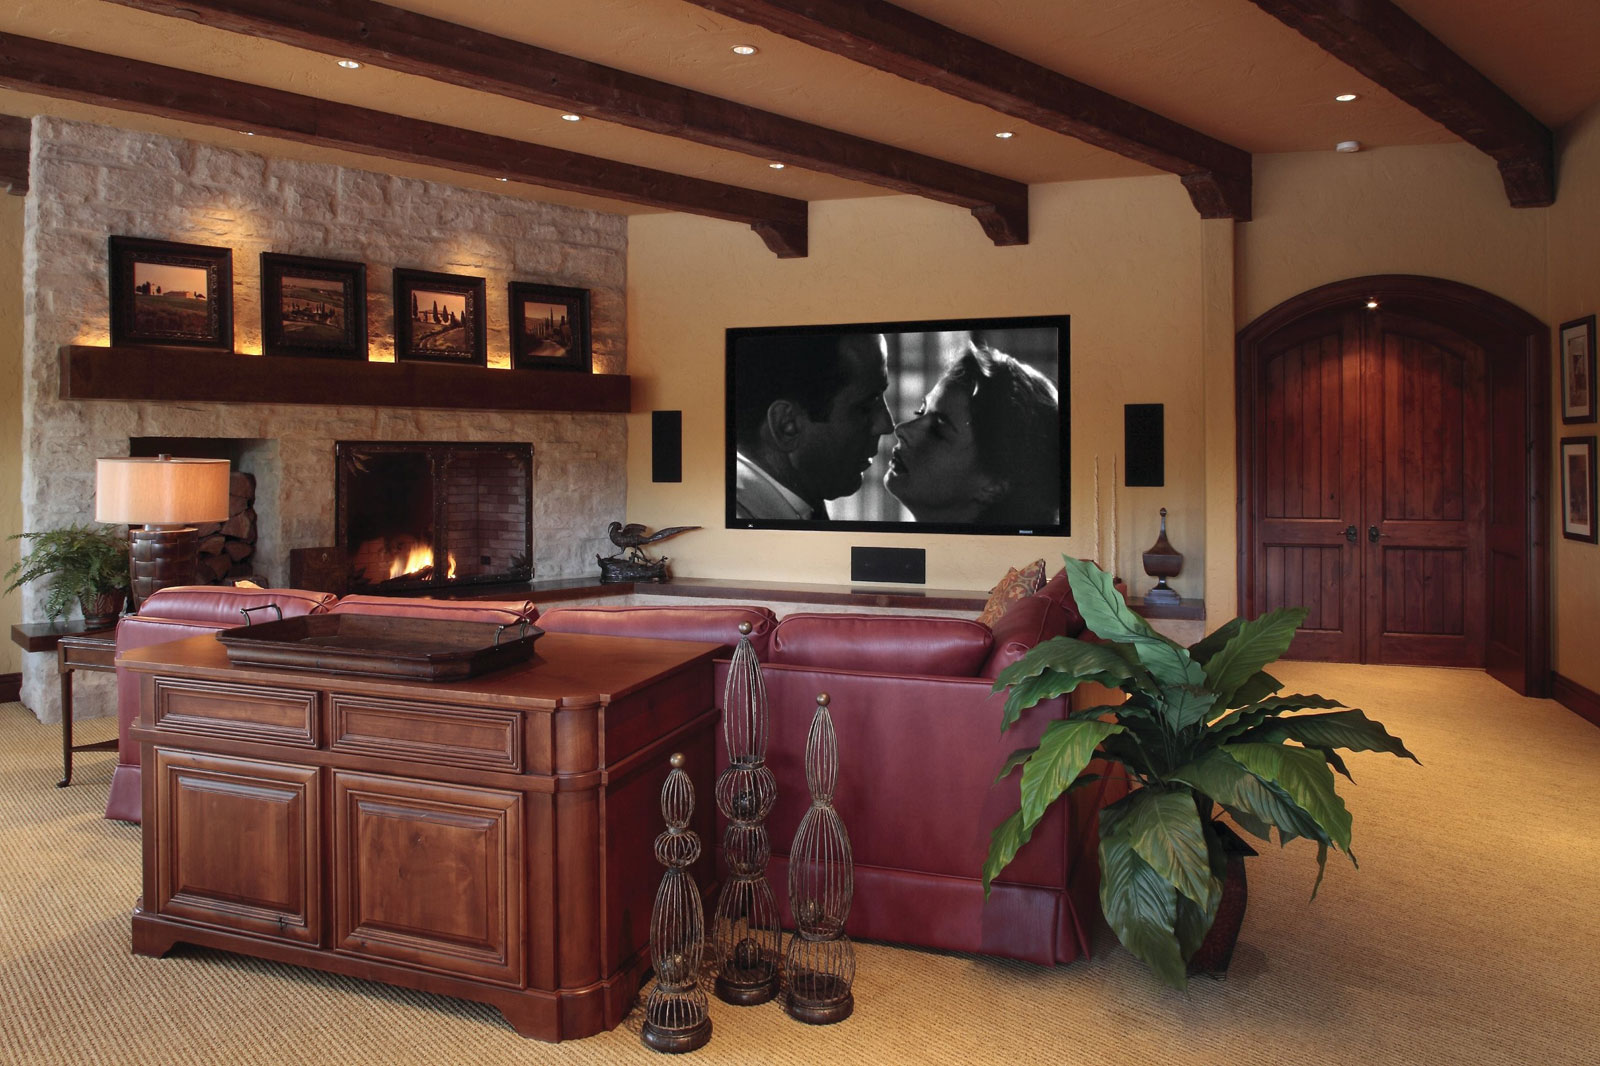 Media Room Couches Excellent Media Room Design With Couches Coffee Table A Fireplace And Flat Screen TV For Media Room Ideas Decoration Decorative Media Room Ideas In Contemporary Design